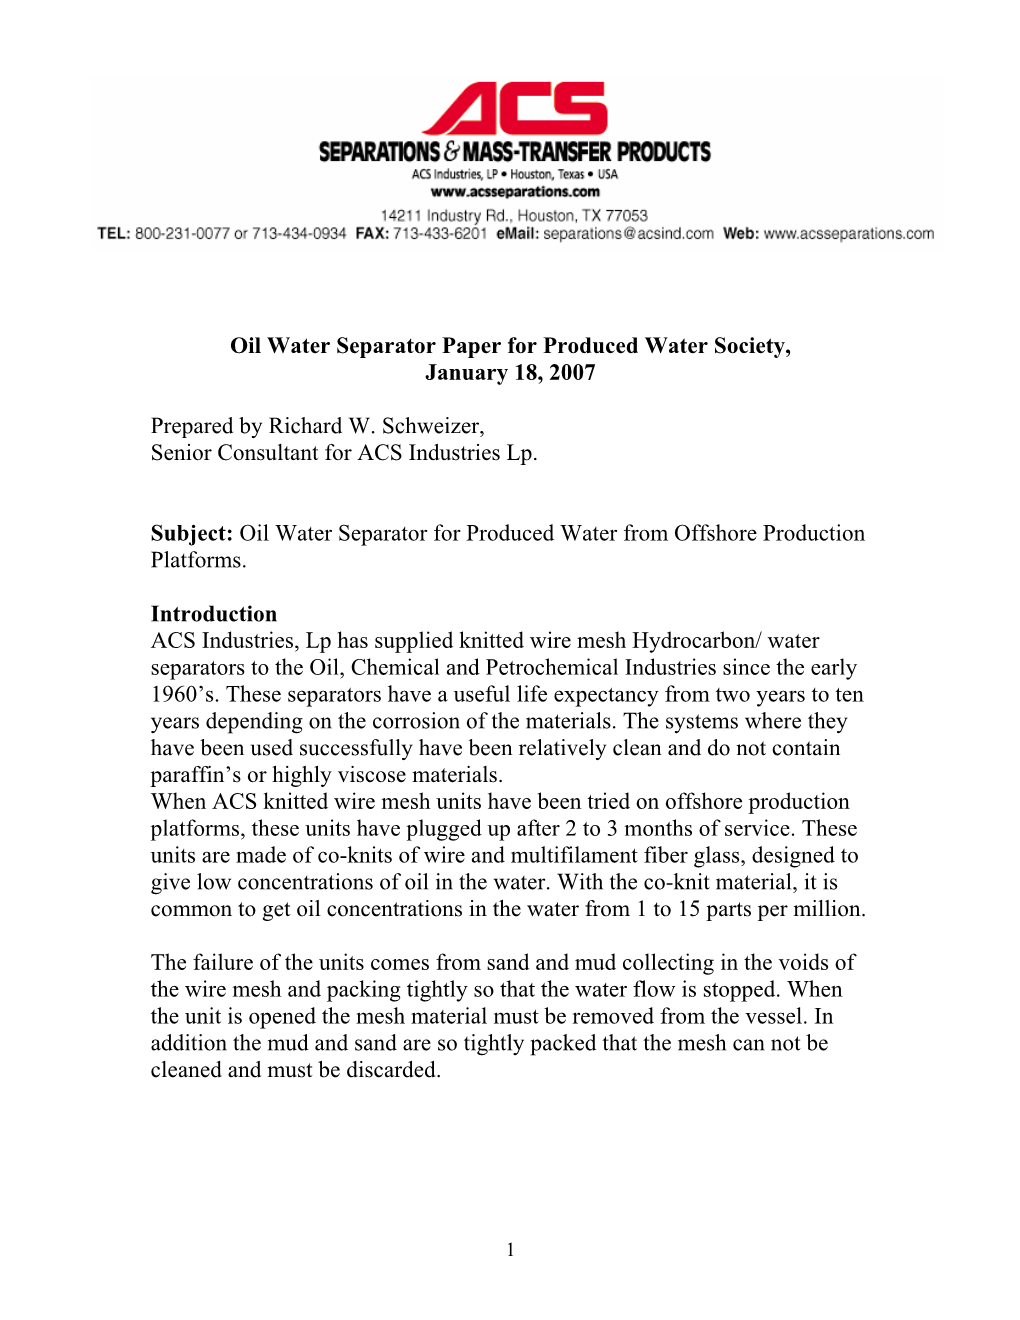 Oil Water Separator Paper for Produced Water Society, January 18, 2007